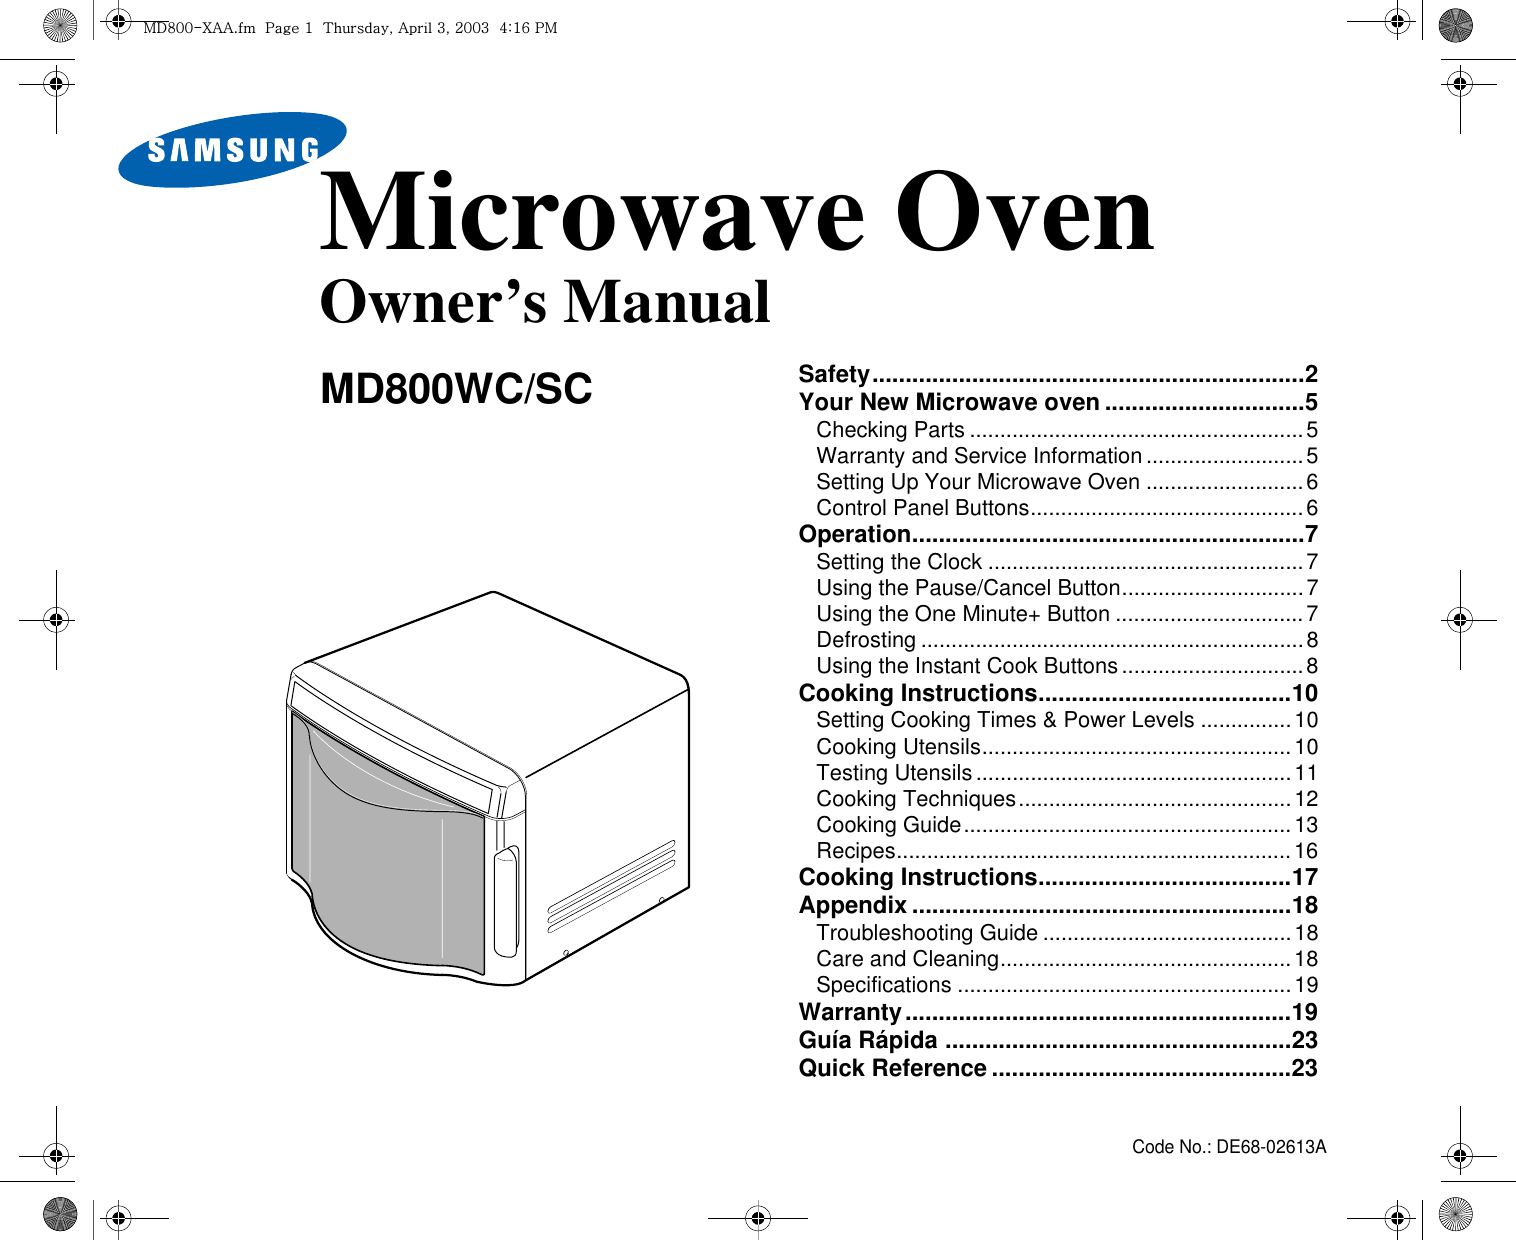 Code No.: DE68-02613AMicrowave OvenOwner’s ManualMD800WC/SC Safety.................................................................2Your New Microwave oven ..............................5Checking Parts .......................................................5Warranty and Service Information..........................5Setting Up Your Microwave Oven ..........................6Control Panel Buttons.............................................6Operation...........................................................7Setting the Clock ....................................................7Using the Pause/Cancel Button..............................7Using the One Minute+ Button ...............................7Defrosting ...............................................................8Using the Instant Cook Buttons..............................8Cooking Instructions......................................10Setting Cooking Times &amp; Power Levels ...............10Cooking Utensils...................................................10Testing Utensils....................................................11Cooking Techniques.............................................12Cooking Guide......................................................13Recipes.................................................................16Cooking Instructions......................................17Appendix .........................................................18Troubleshooting Guide .........................................18Care and Cleaning................................................18Specifications .......................................................19Warranty..........................................................19Guía Rápida ....................................................23Quick Reference .............................................23tk_WWThhUGGwGXGG{SGhGZSGYWWZGG[aX]Gwt